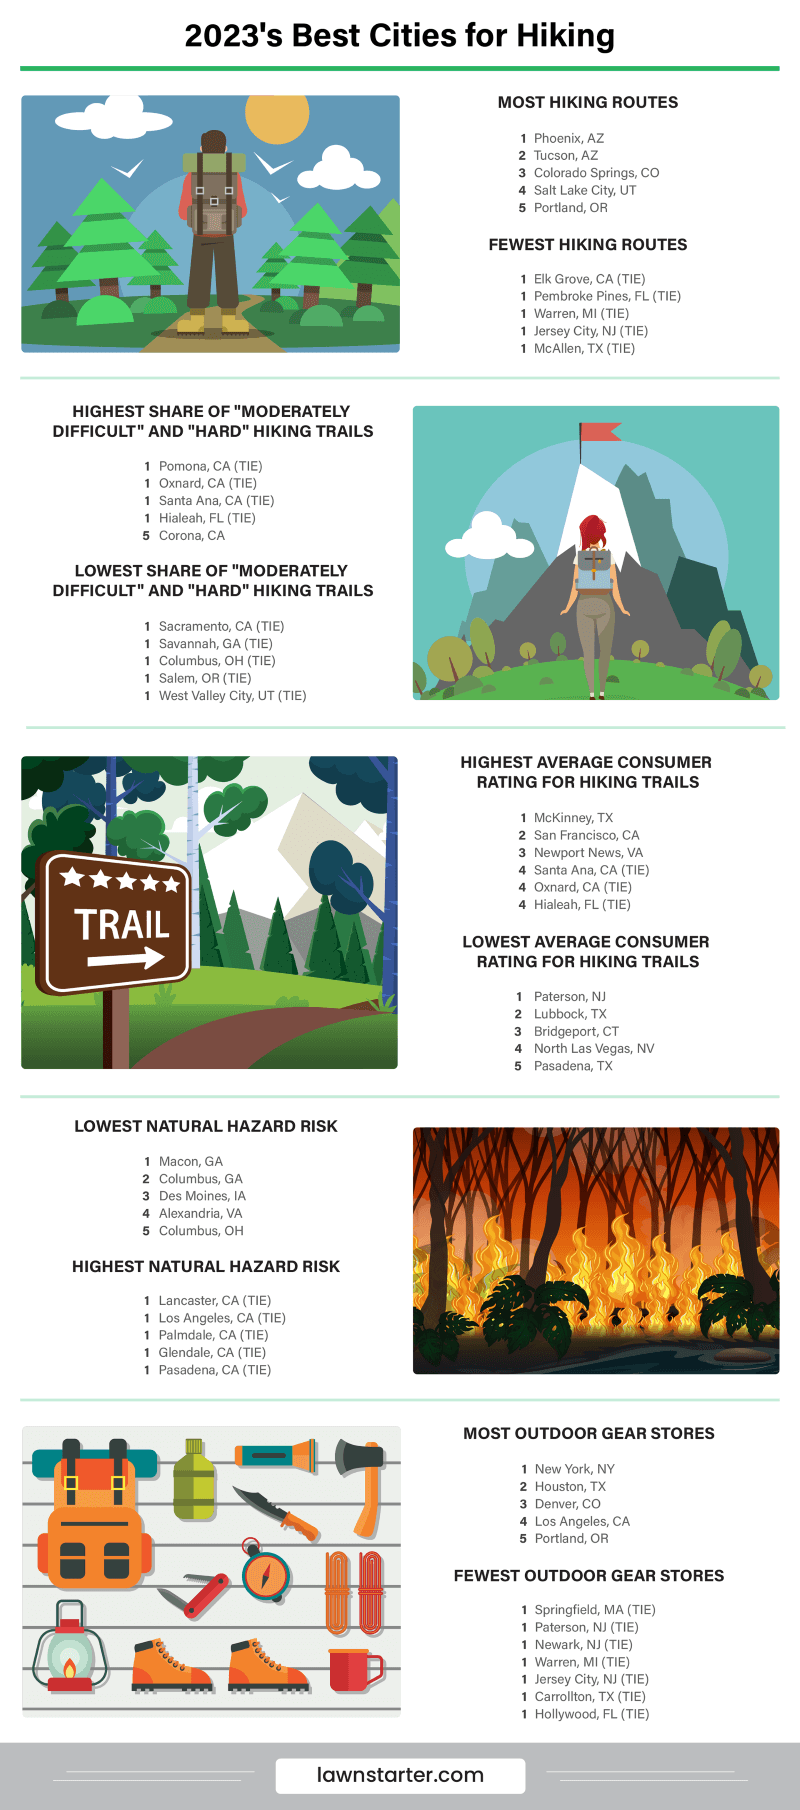 Infographic showing the Best Cities for Hiking, a ranking based on hiking trail access and quality, climate, safety, and more